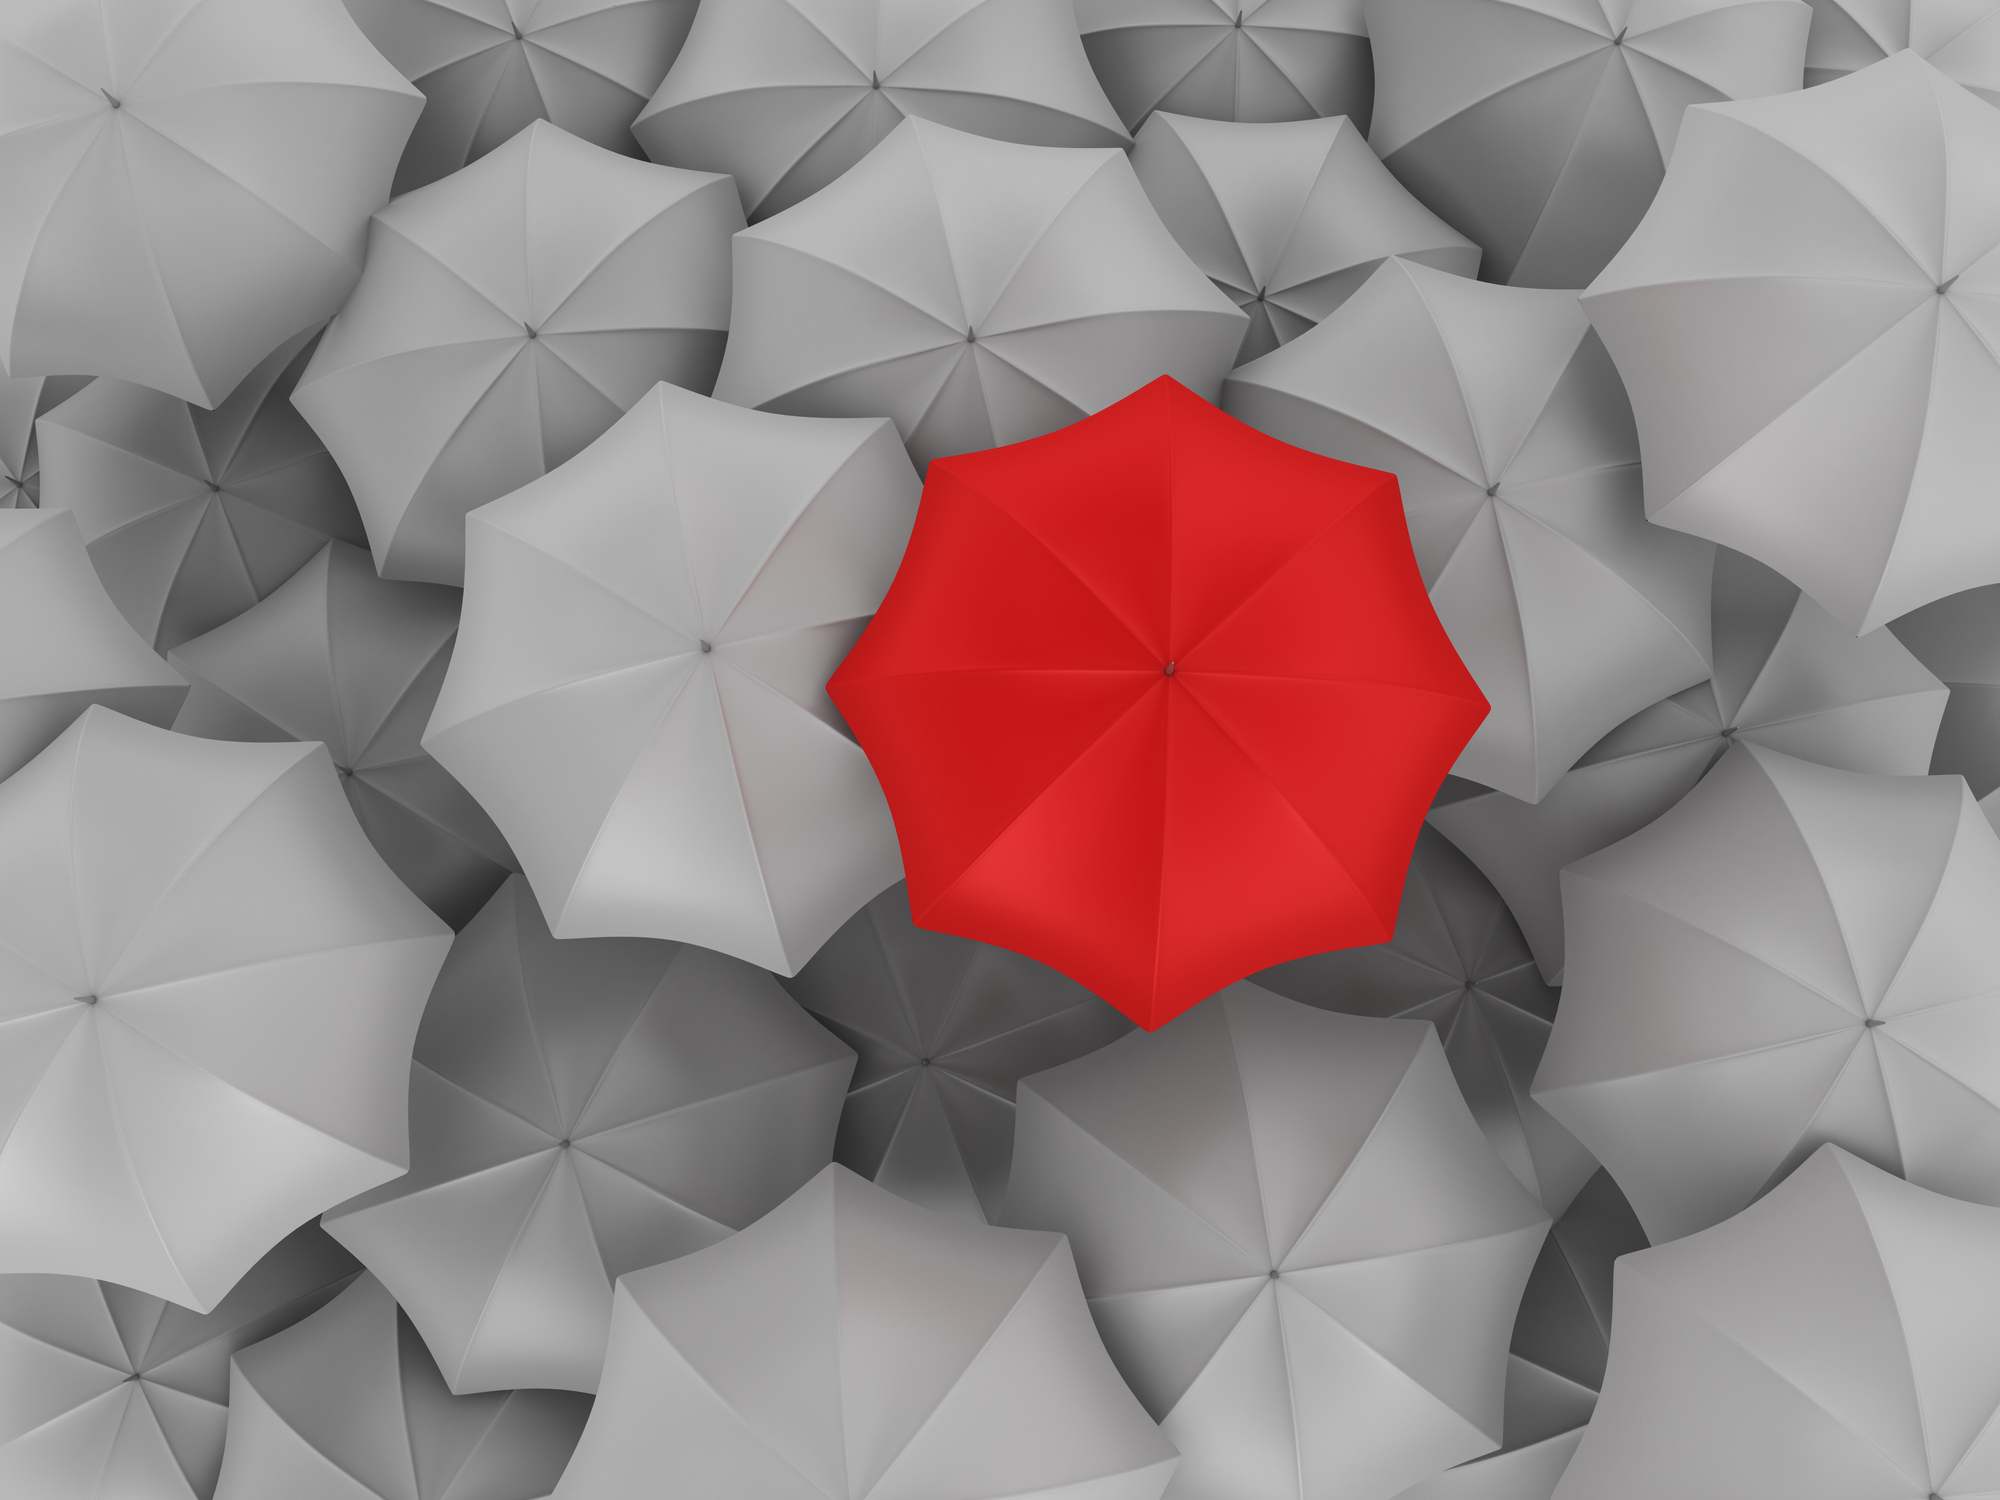 Red Umbrella with Many Gray Ones